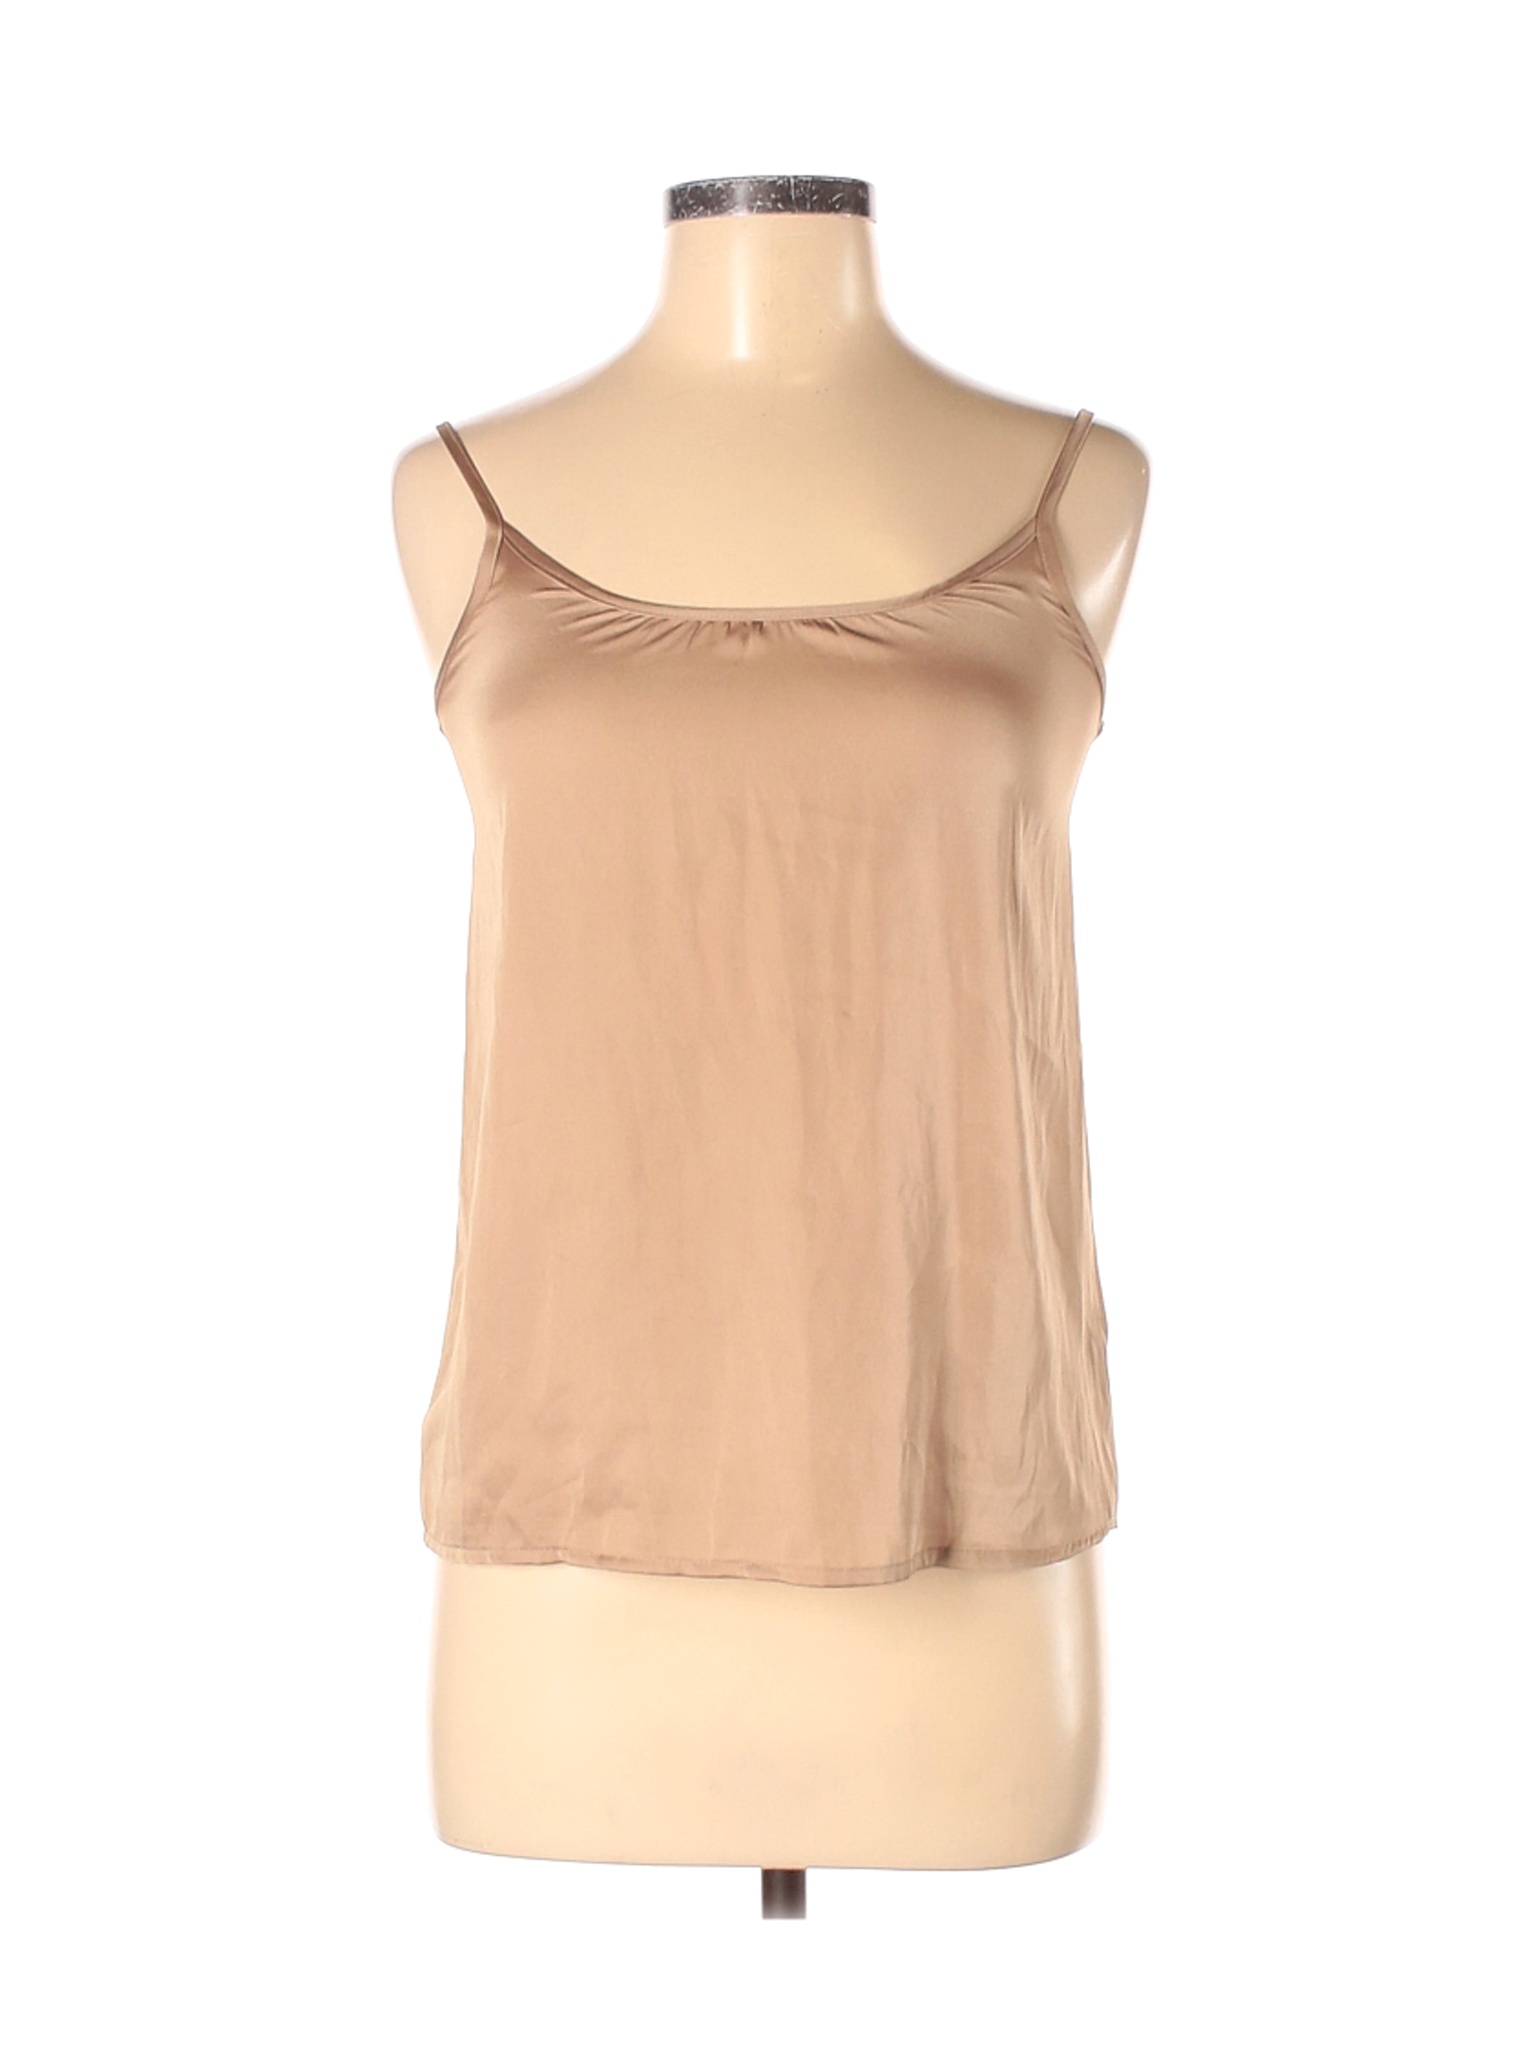 The Limited Women Brown Tank Top XS | eBay